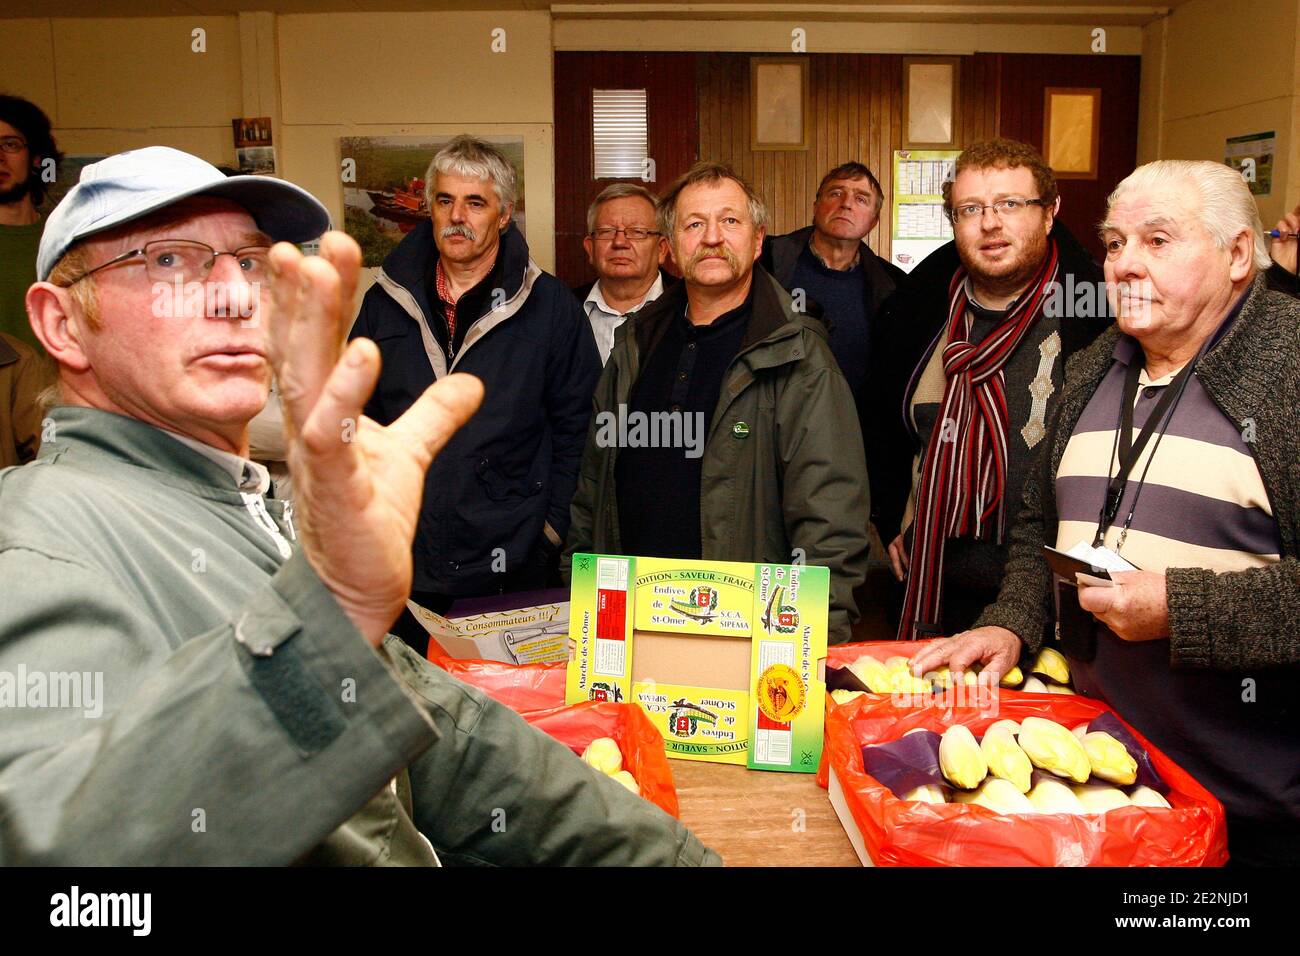 Jose Bove, former spokesman of the Peasant Confederacy and current Member of the European Parliament of the movement 'Europe Ecologie', came to support the environmentalist candidates for the regional elections in the North Pas-de-Calais. Here they visit Stock Photo